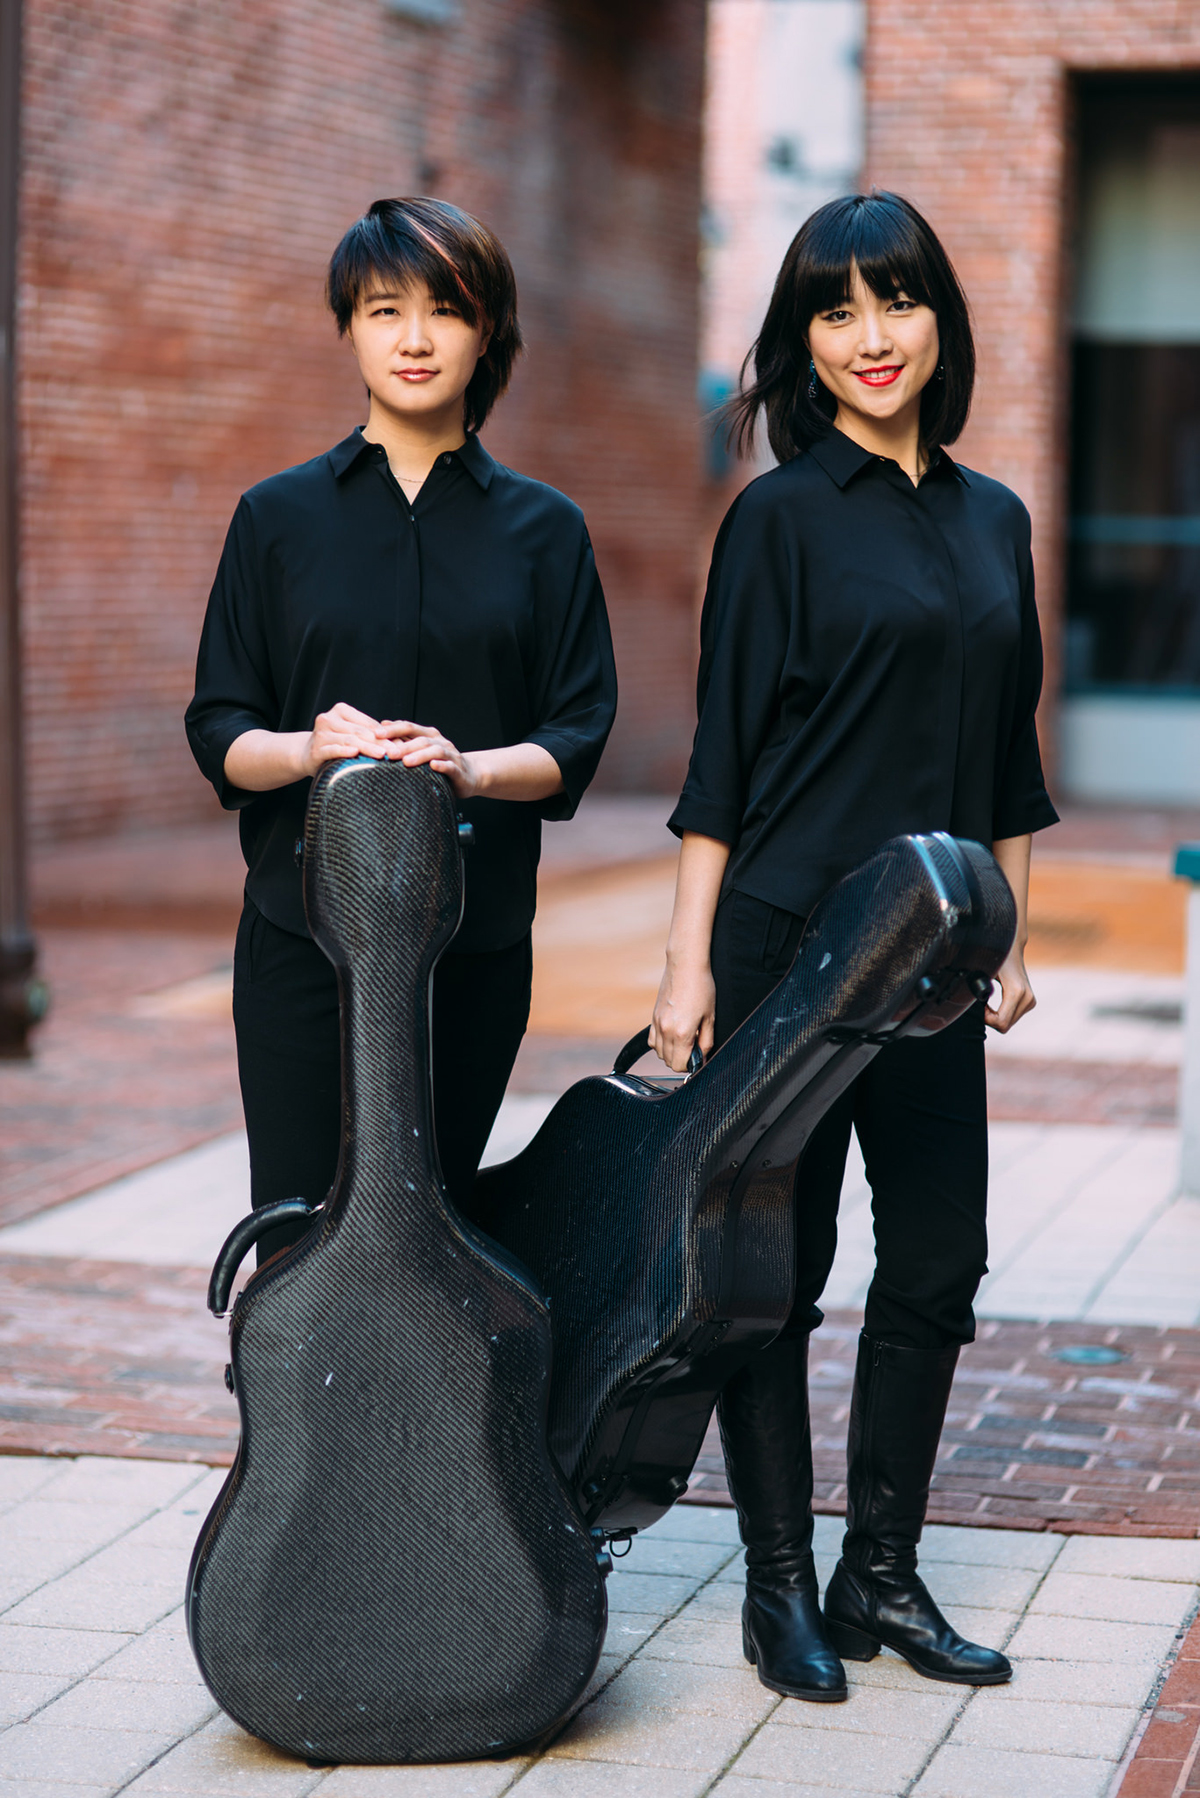 Precision and Heart: Beijing Guitar Duo - The Arts at Hope